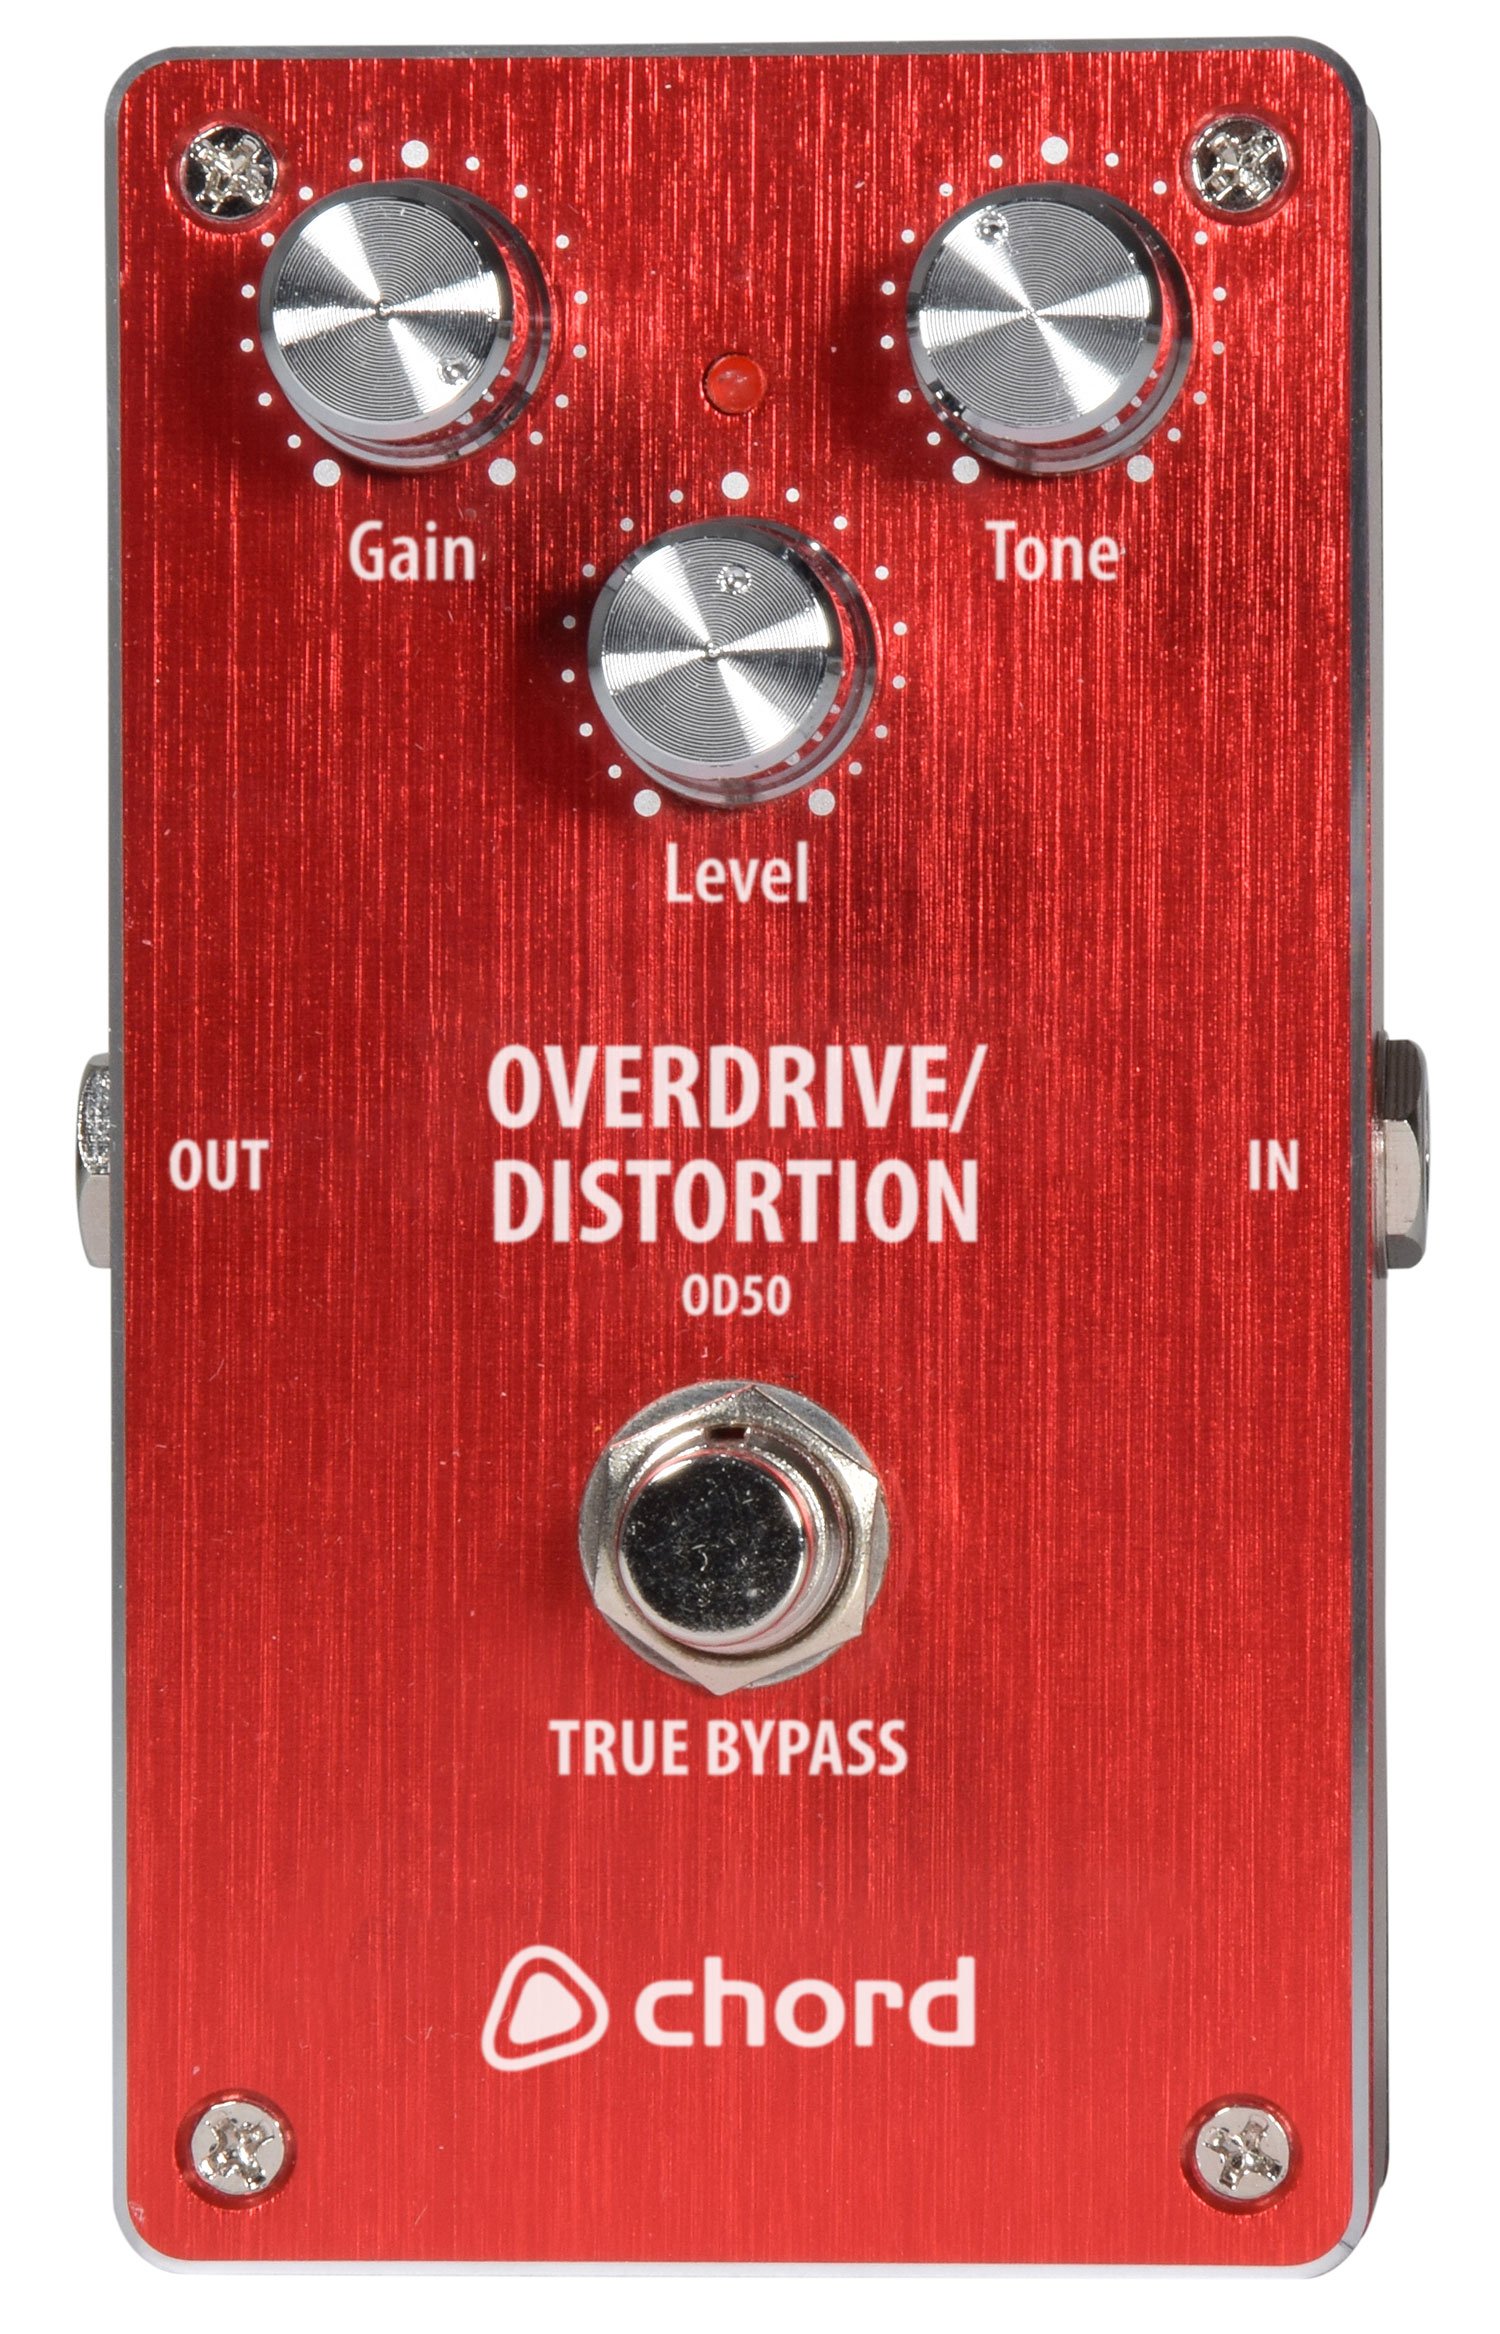 OD-50 Overdrive/Distortion Pedal OD-50 Overdrive/Distortion Pedal